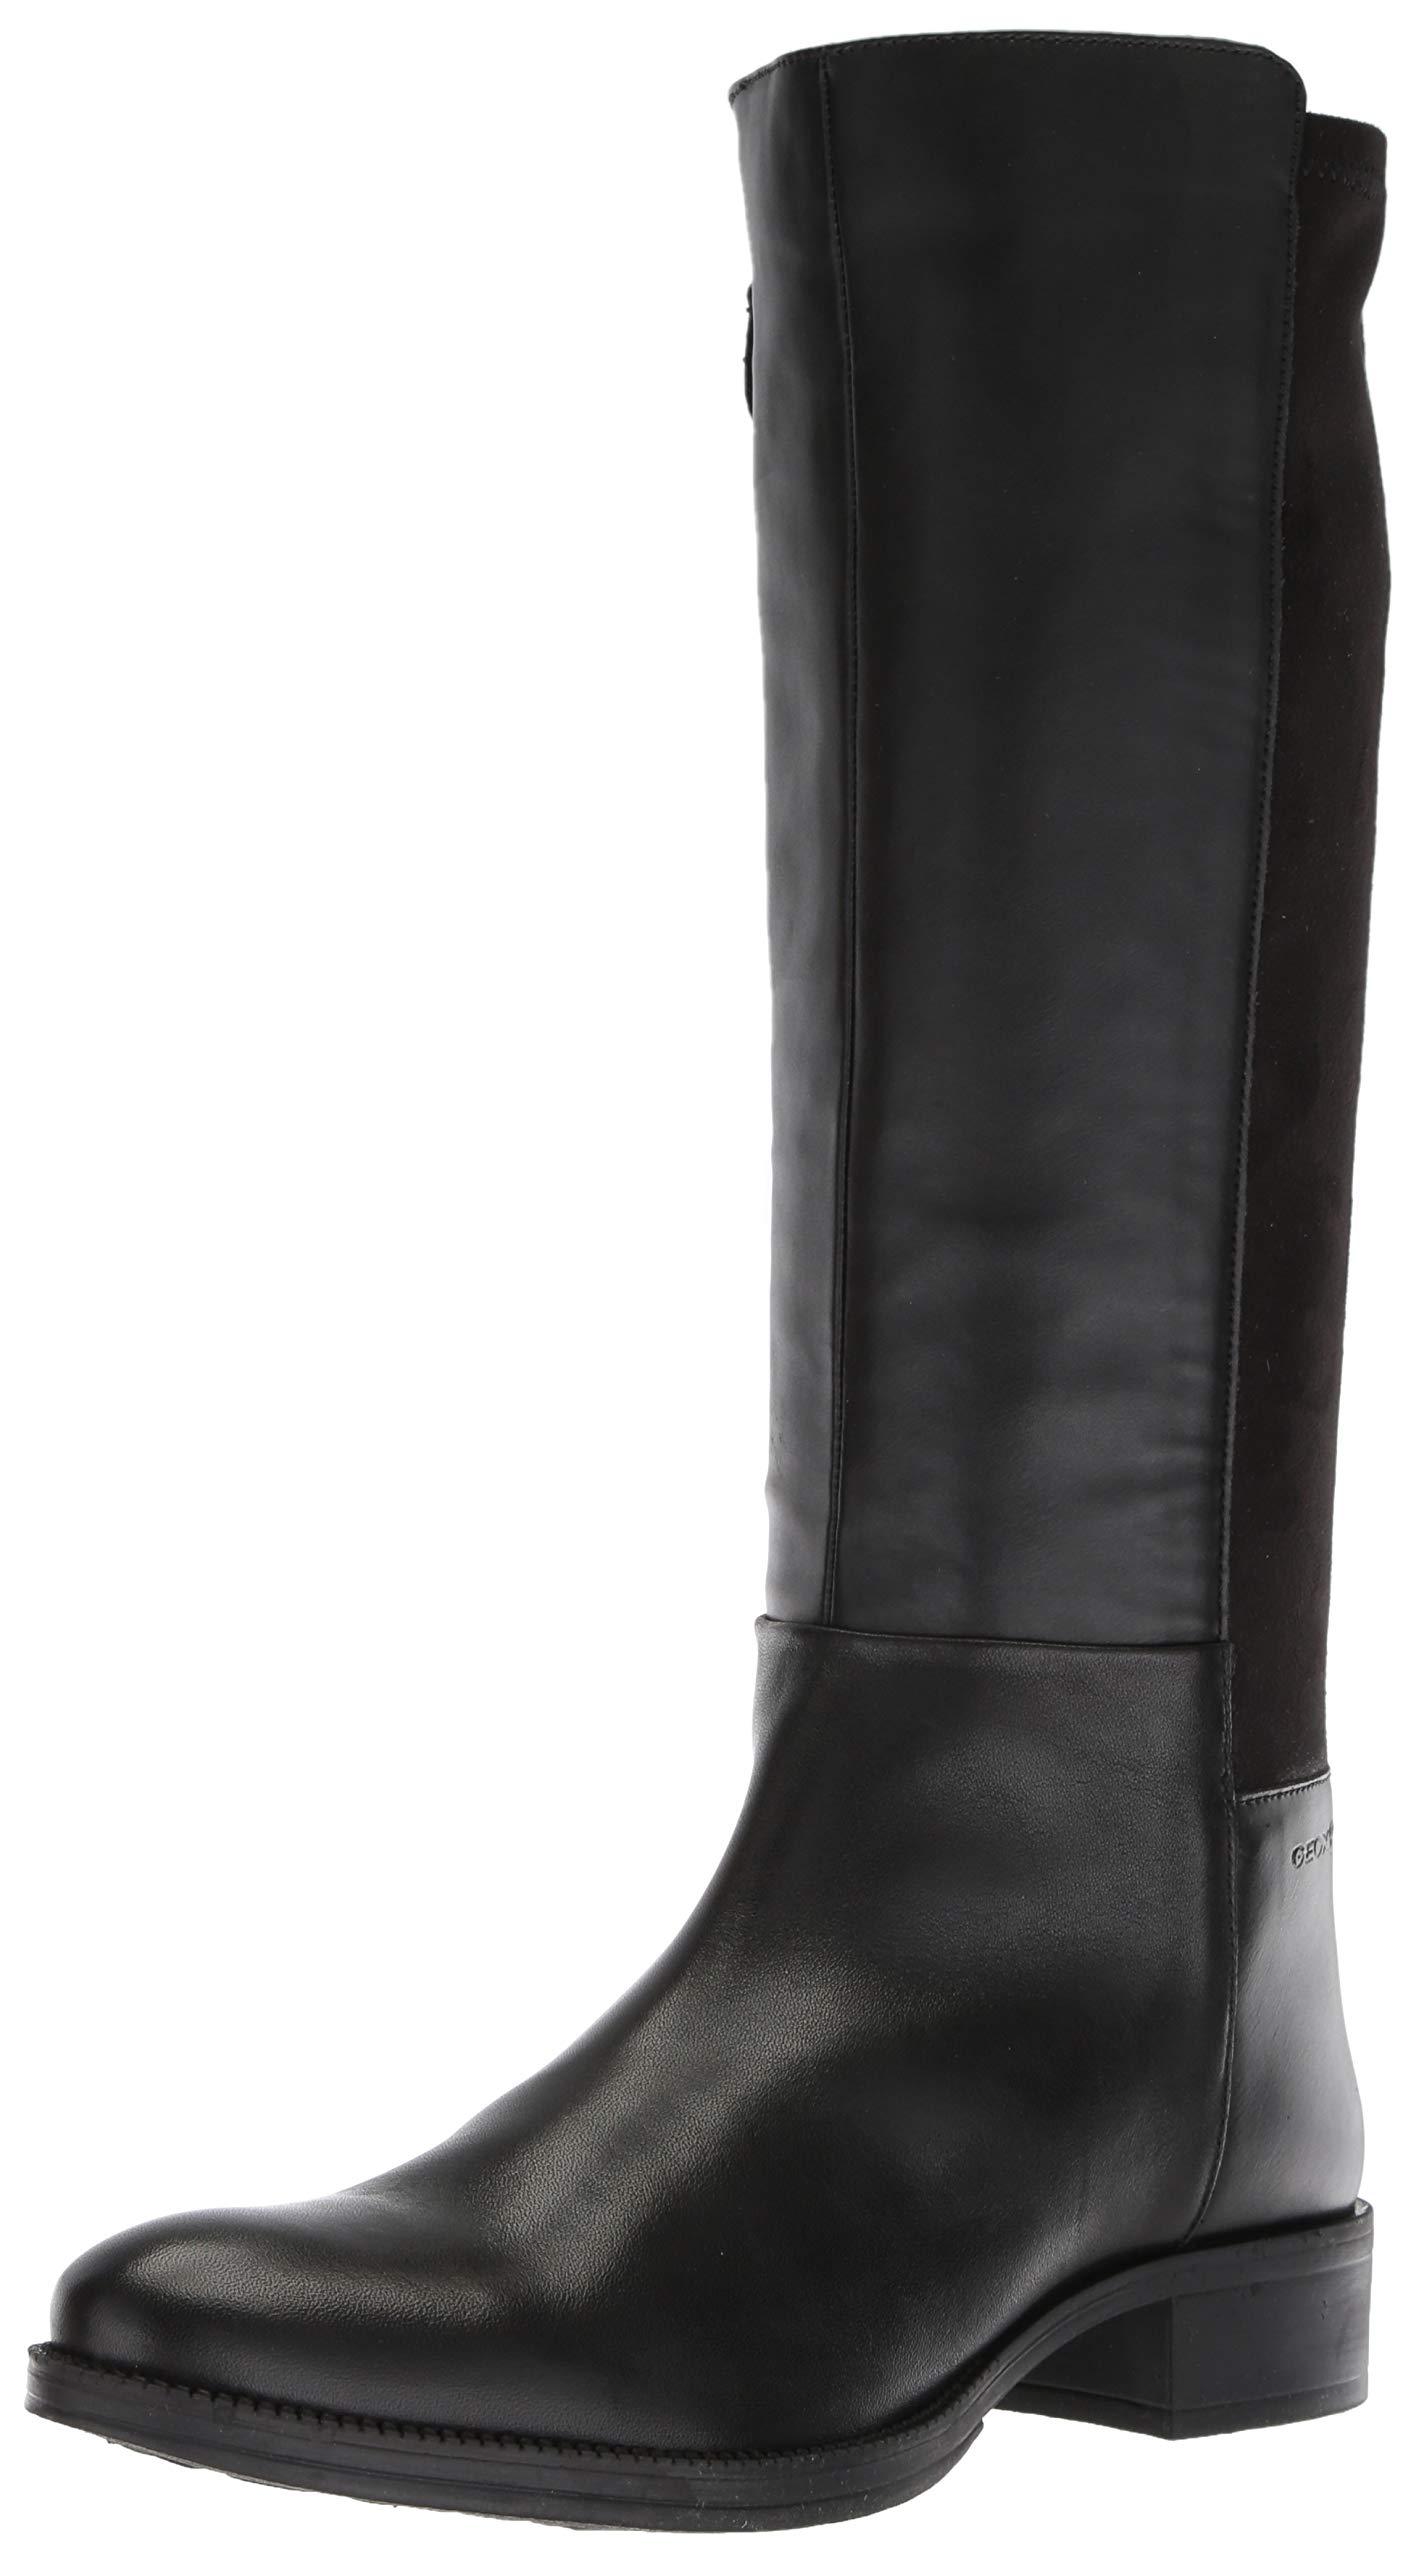 Geox Laceyin 2 Tall Zip Riding Boot Knee High in Black | Lyst UK